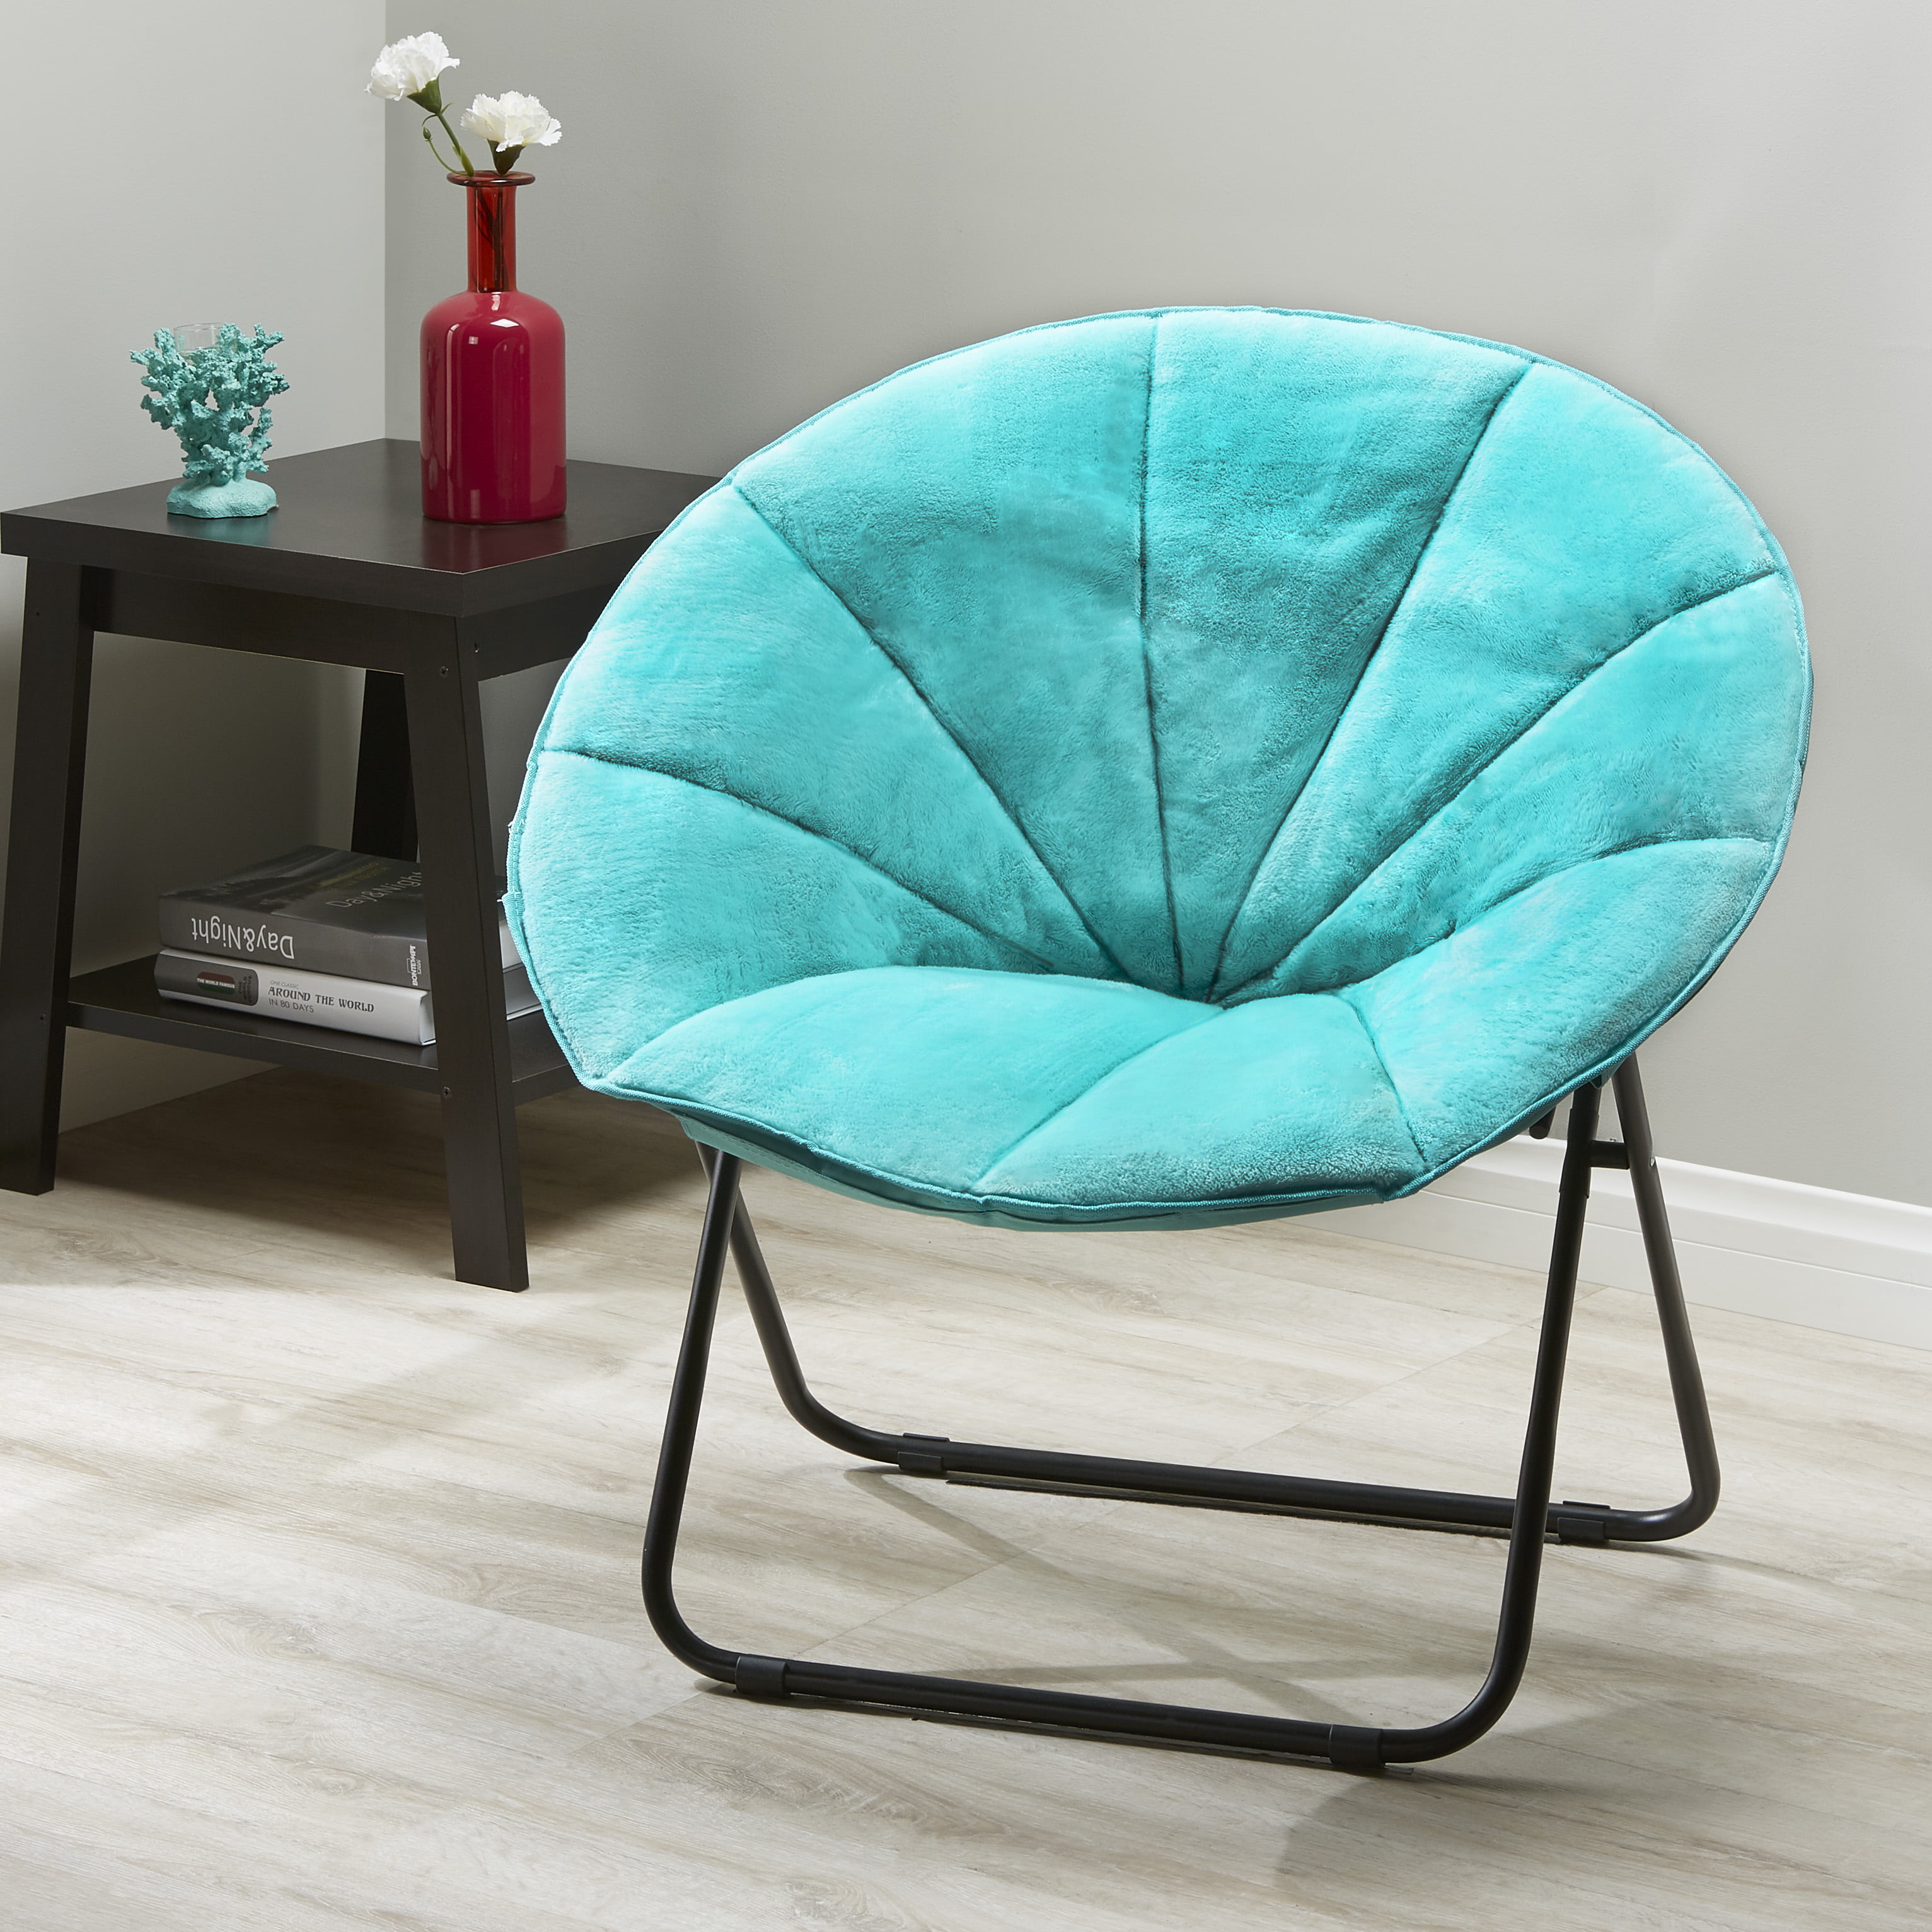 Mainstays Faux-Fur Saucer Chair Aqua Wind with 2 Exclusive Pillows and 1 Sleeping Mask